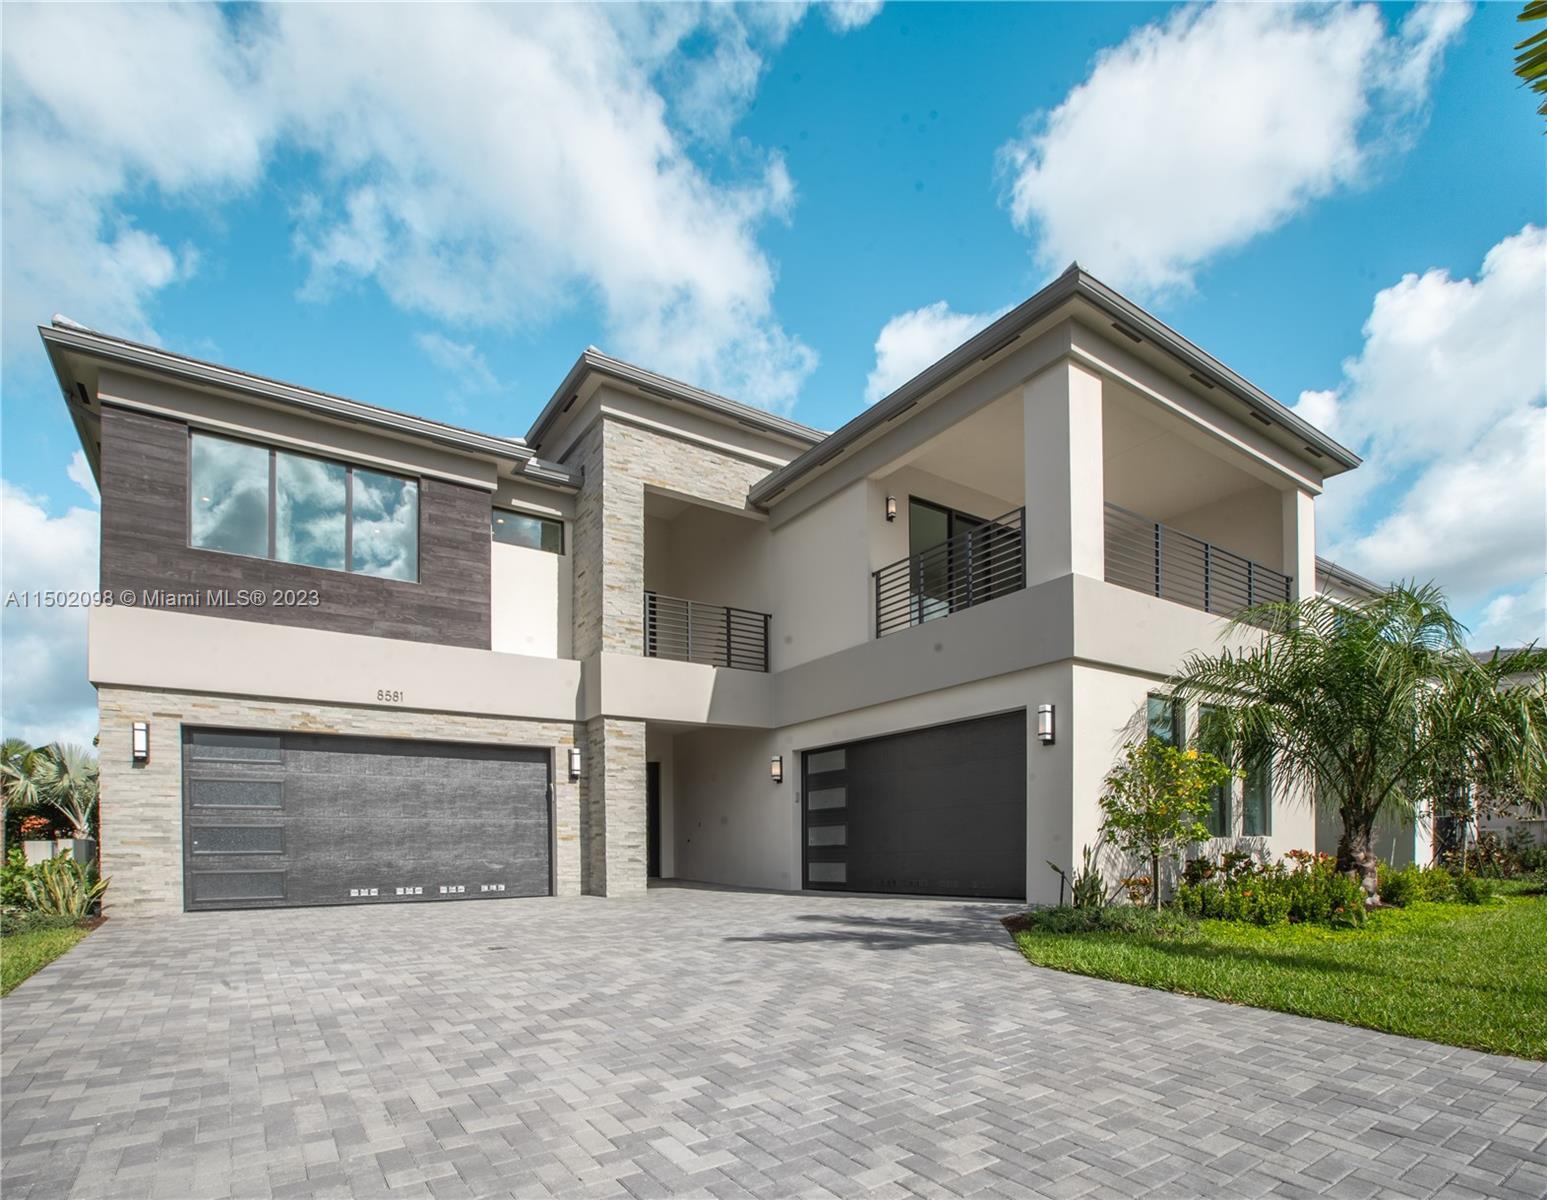 Don’t miss this unique opportunity to own an ultra-modern home at Lotus Palm in Boca Raton. The Mald